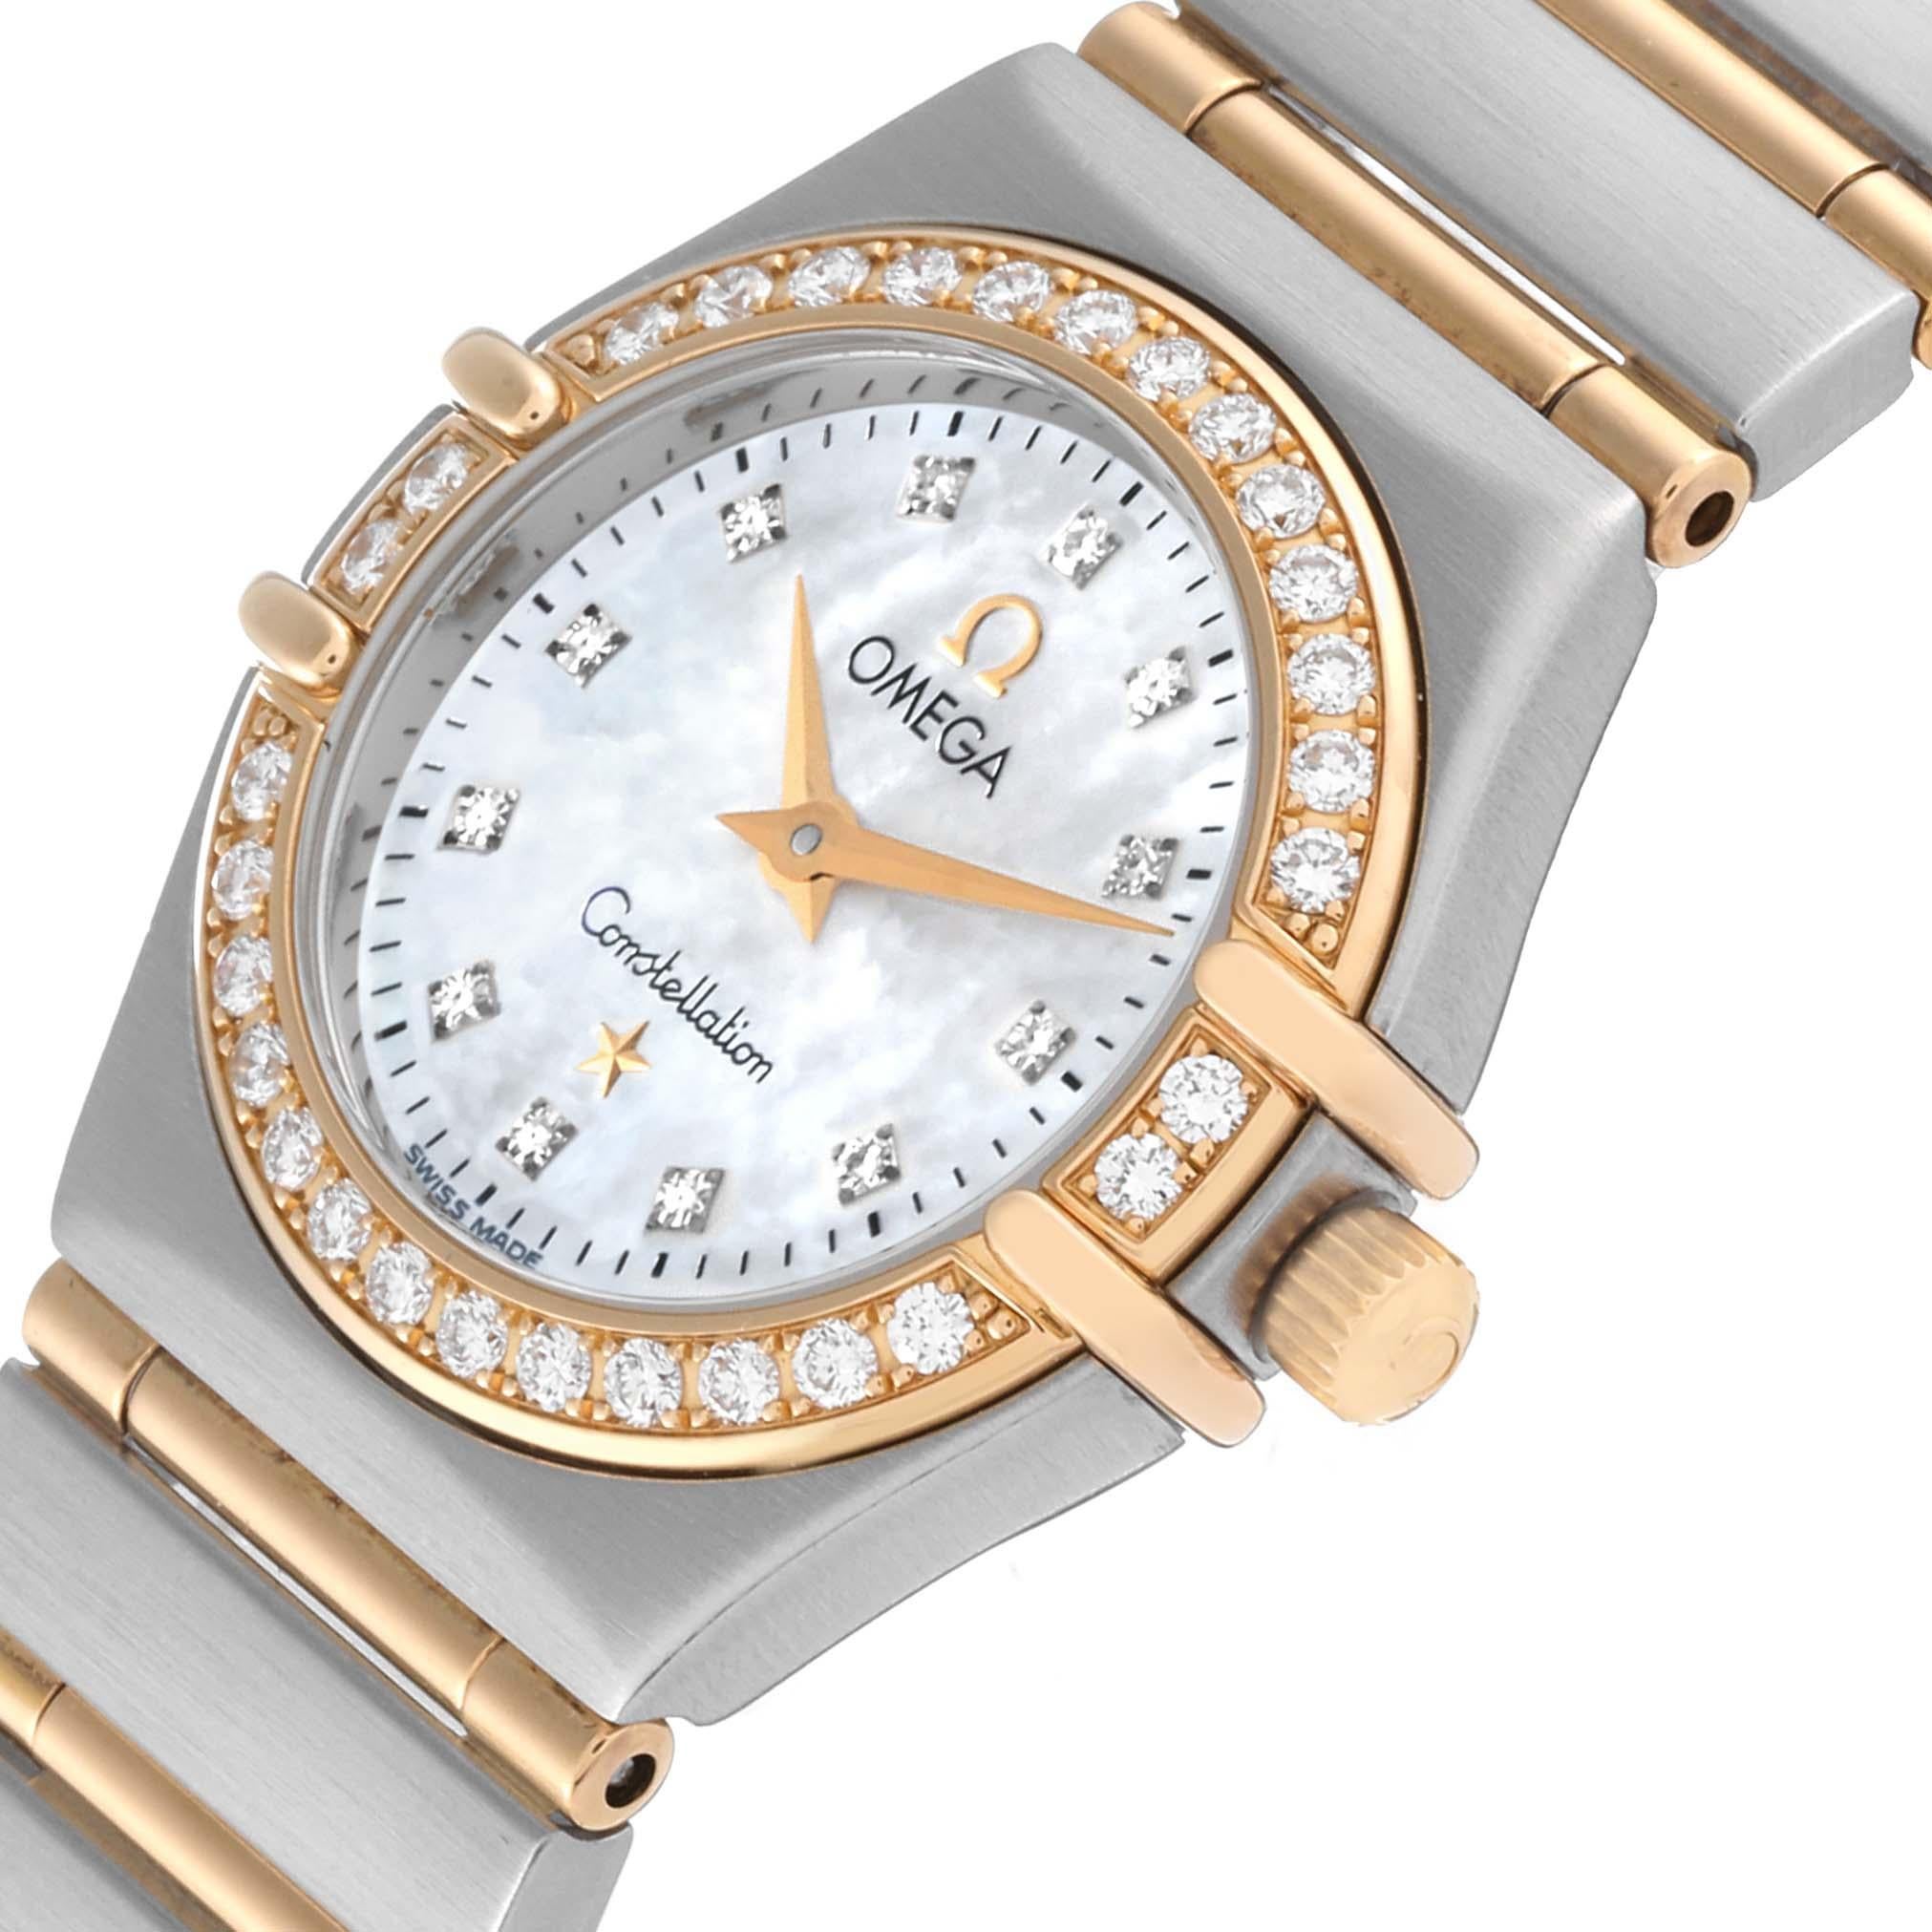 Omega Constellation 95 Mother Of Pearl Diamond Yellow Gold Steel Ladies Watch 1267.75.00. Quartz movement. Stainless steel and 18k yellow gold round case 22.5 mm in diameter. 18k yellow gold original Omega factory diamond bezel. Scratch resistant